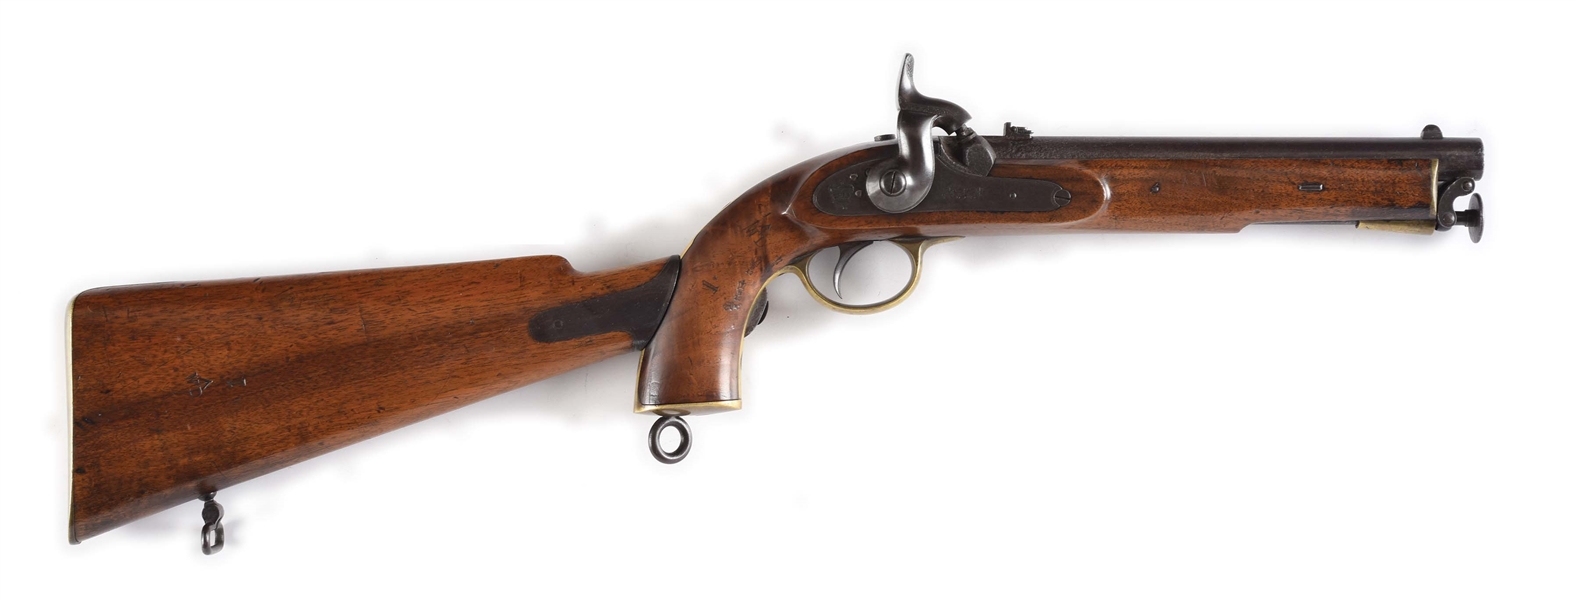 (A) RARE PATTERN 1856 RIFLED PERCUSSION SERVICE PISTOL WITH ORIGINAL DETACHABLE SHOULDER STOCK, DATED 1859.